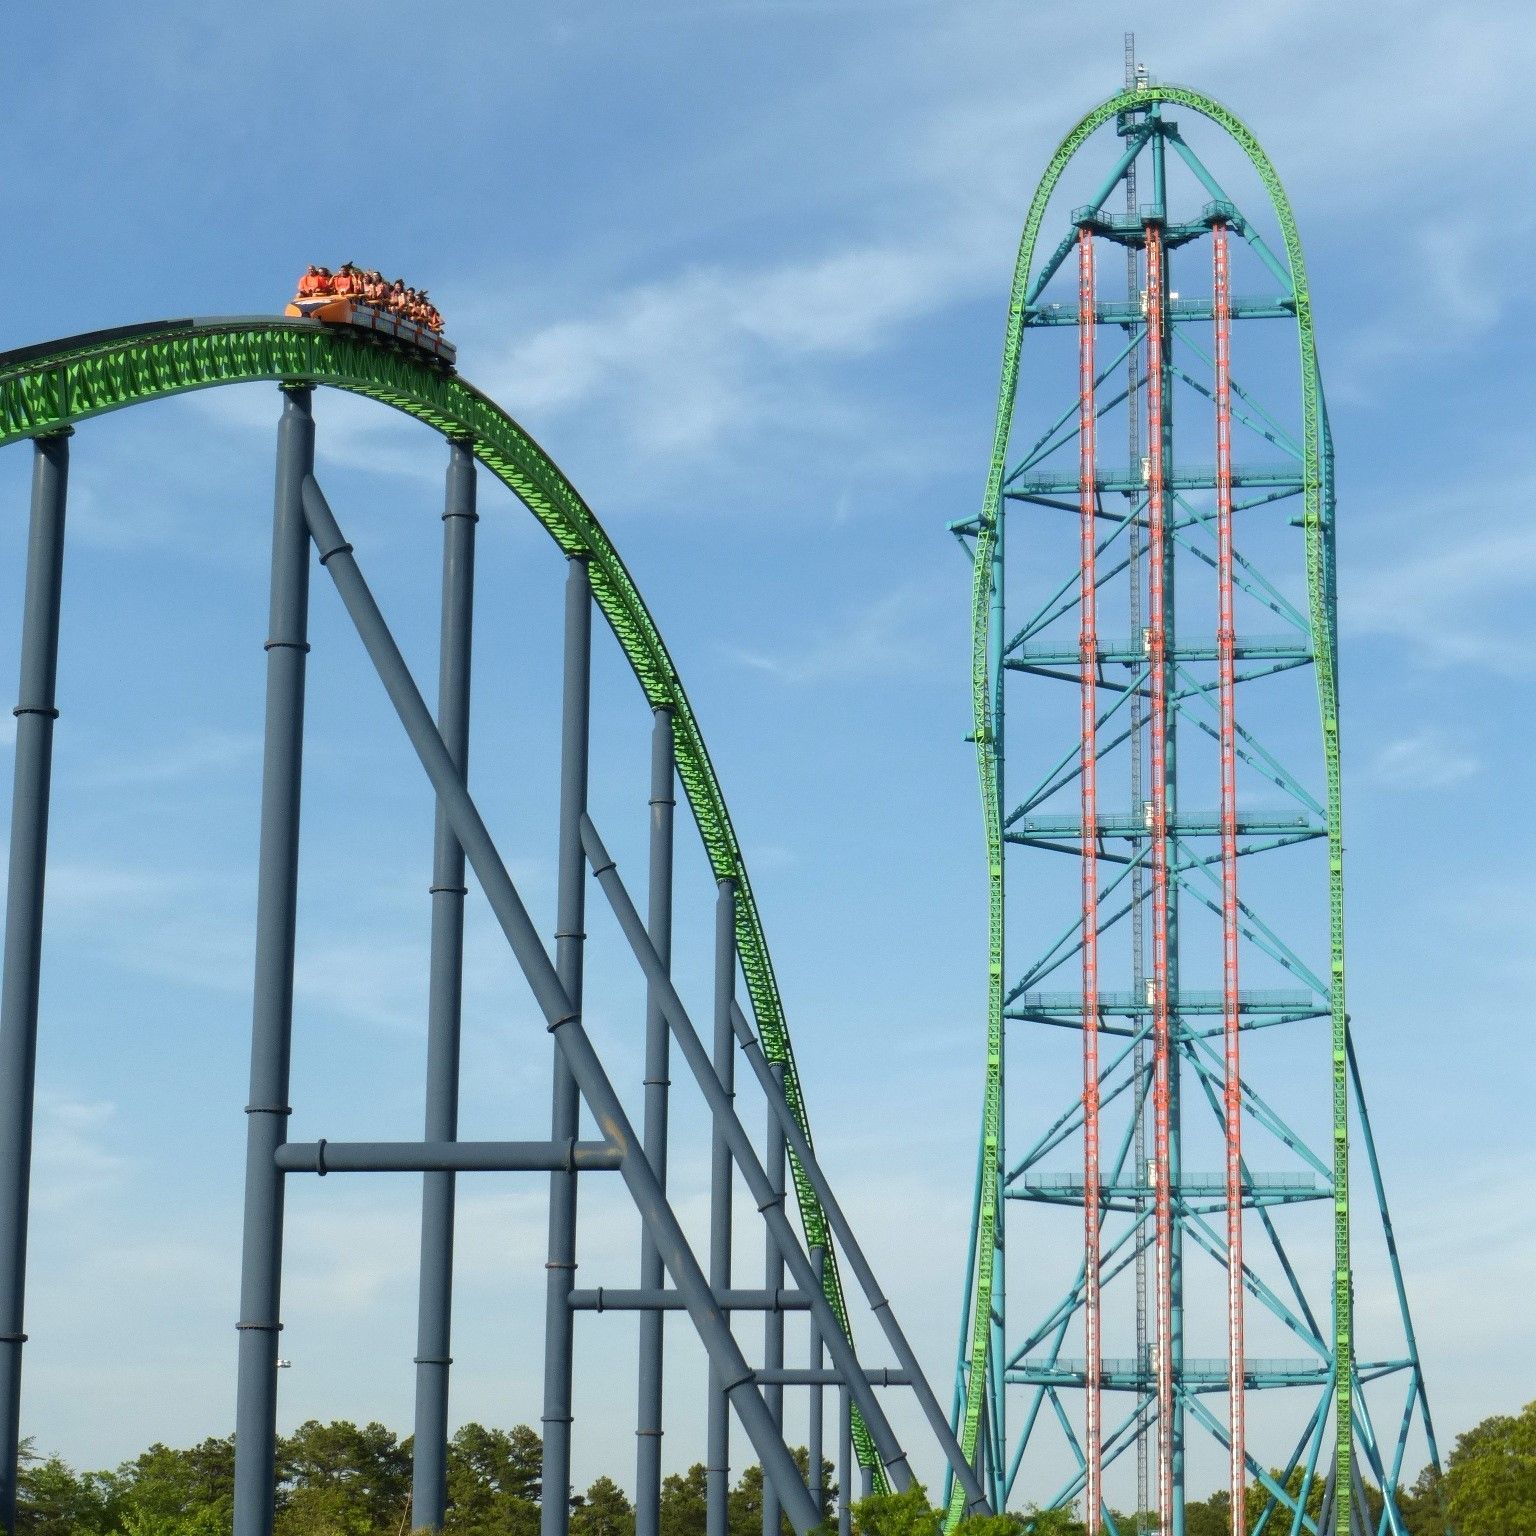 World's Tallest Roller Coaster: world record in Jackson, New Jersey, United States